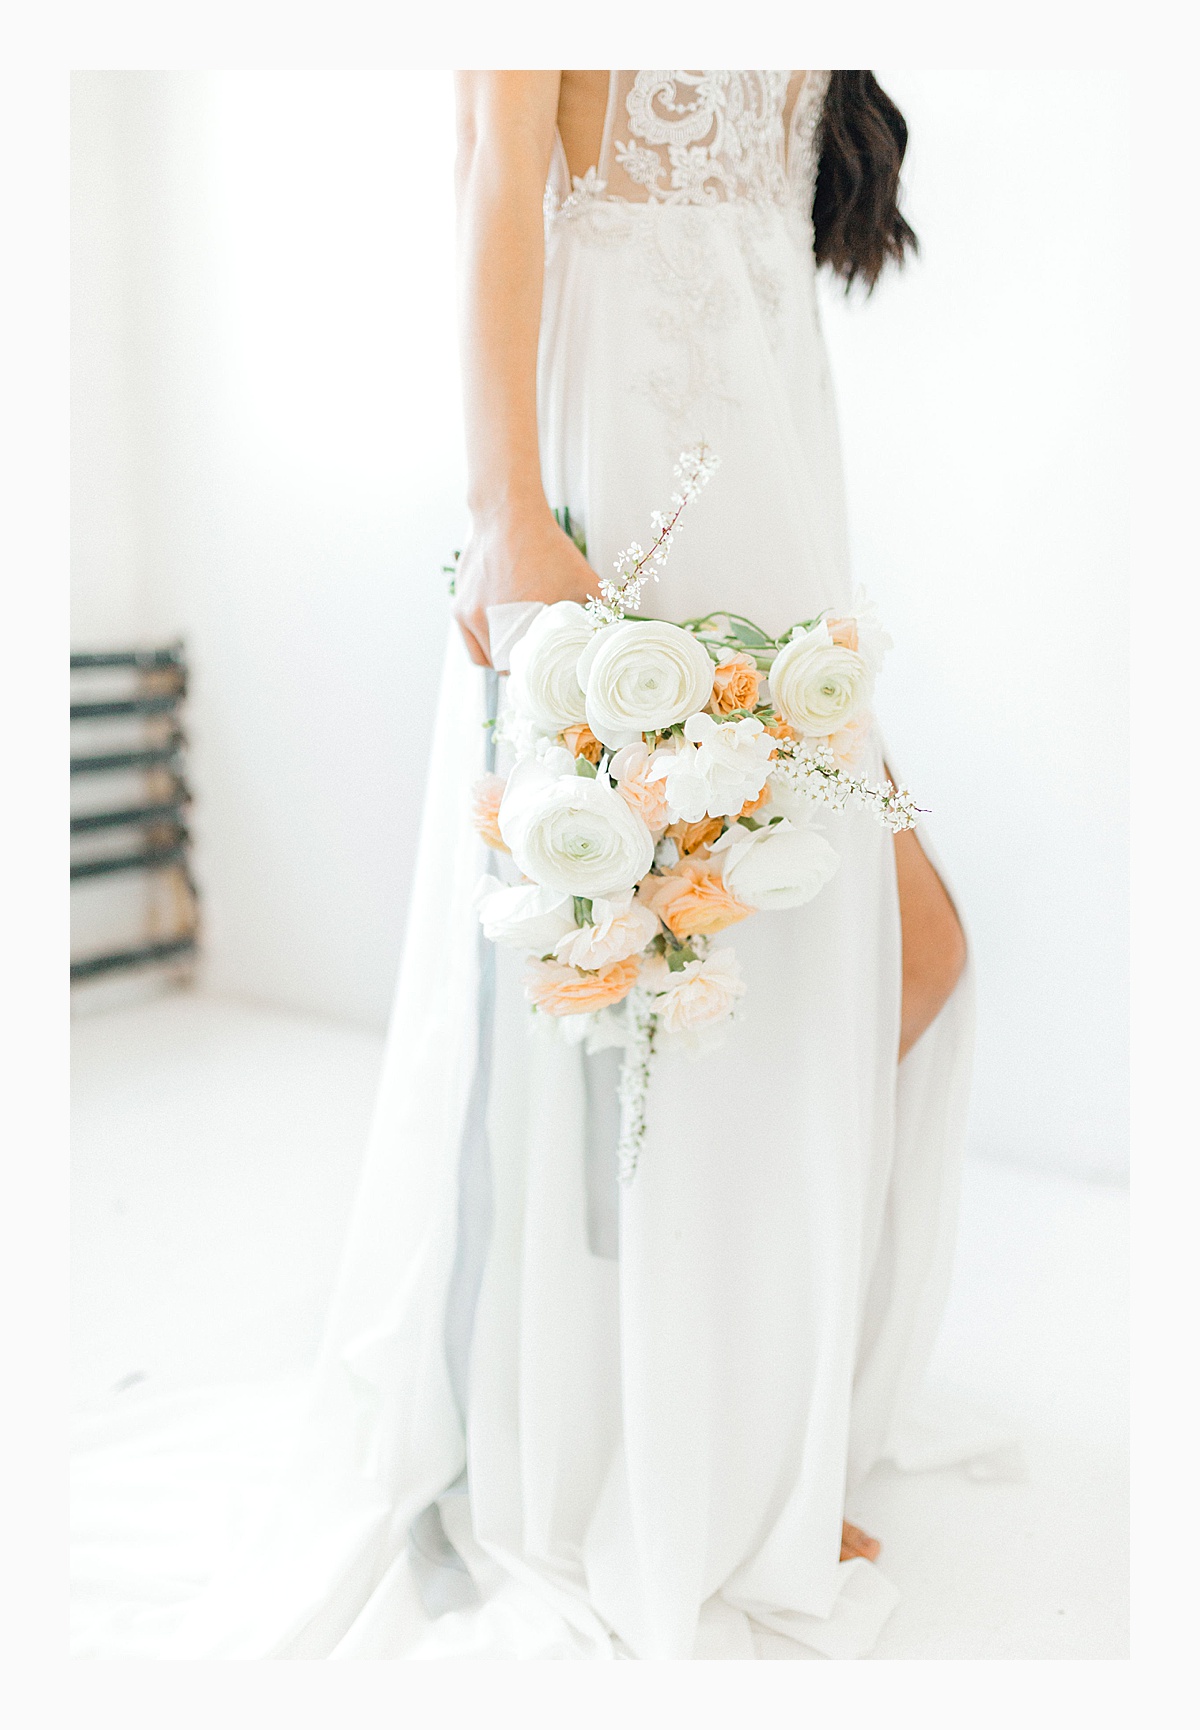 The Bemis Building in downtown Seattle is one of my favorite places to use for photo shoots!  This styled bridal shoot with touches of peach and white was dreamy.  #emmarosecompany #kindredpresets #seattlebride_0018.jpg